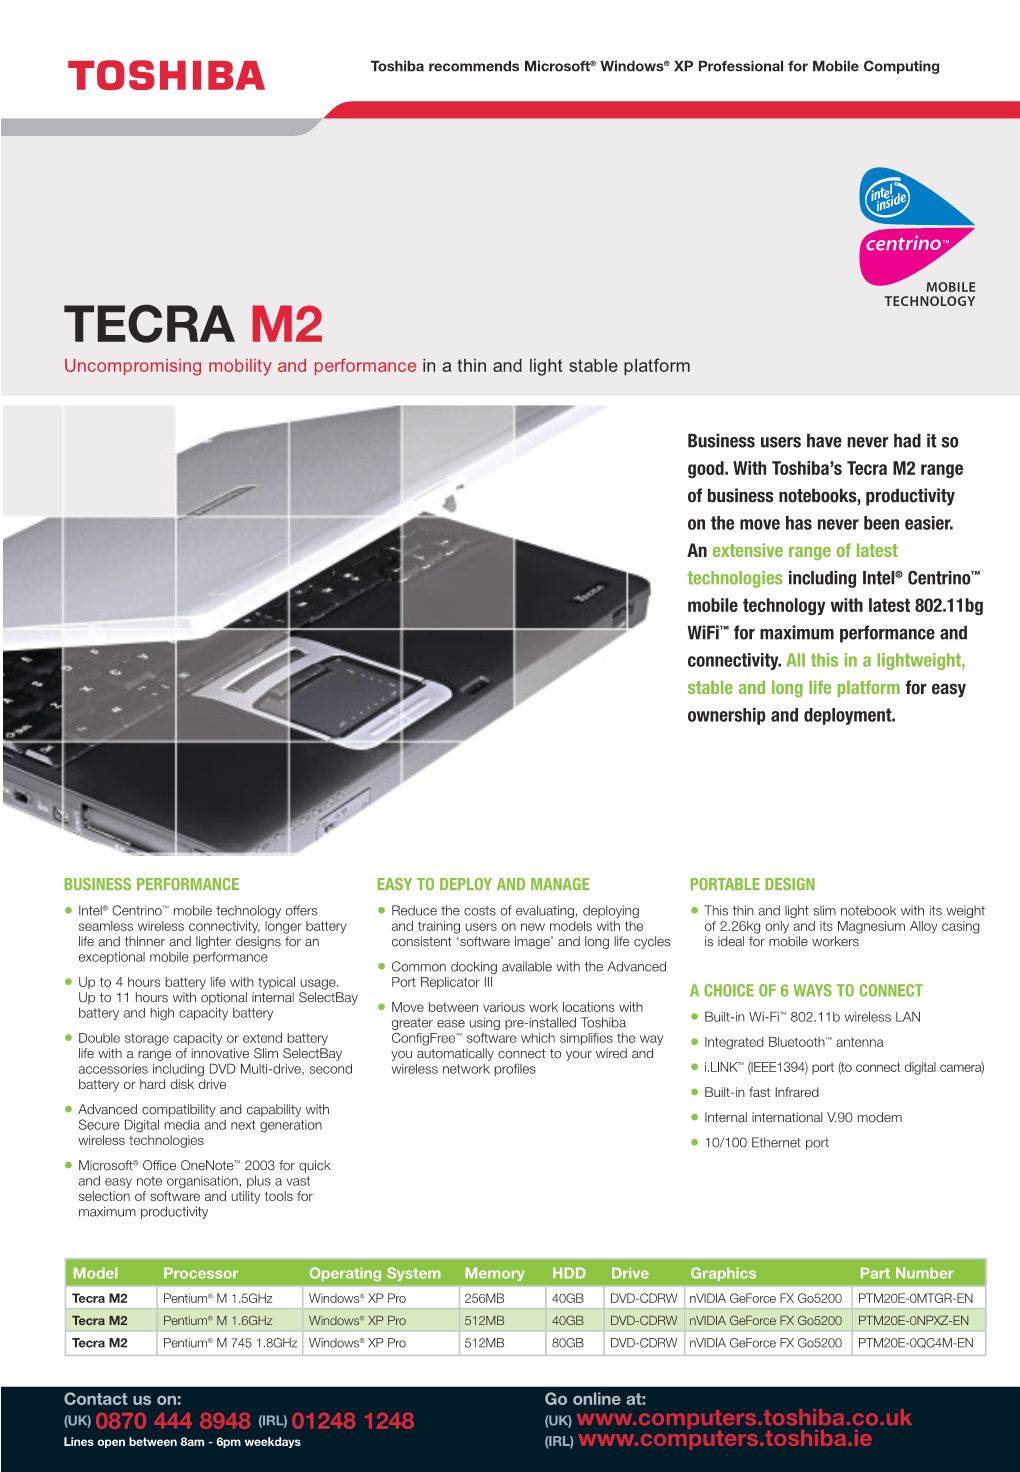 TECRA M2 Uncompromising Mobility and Performance in a Thin and Light Stable Platform